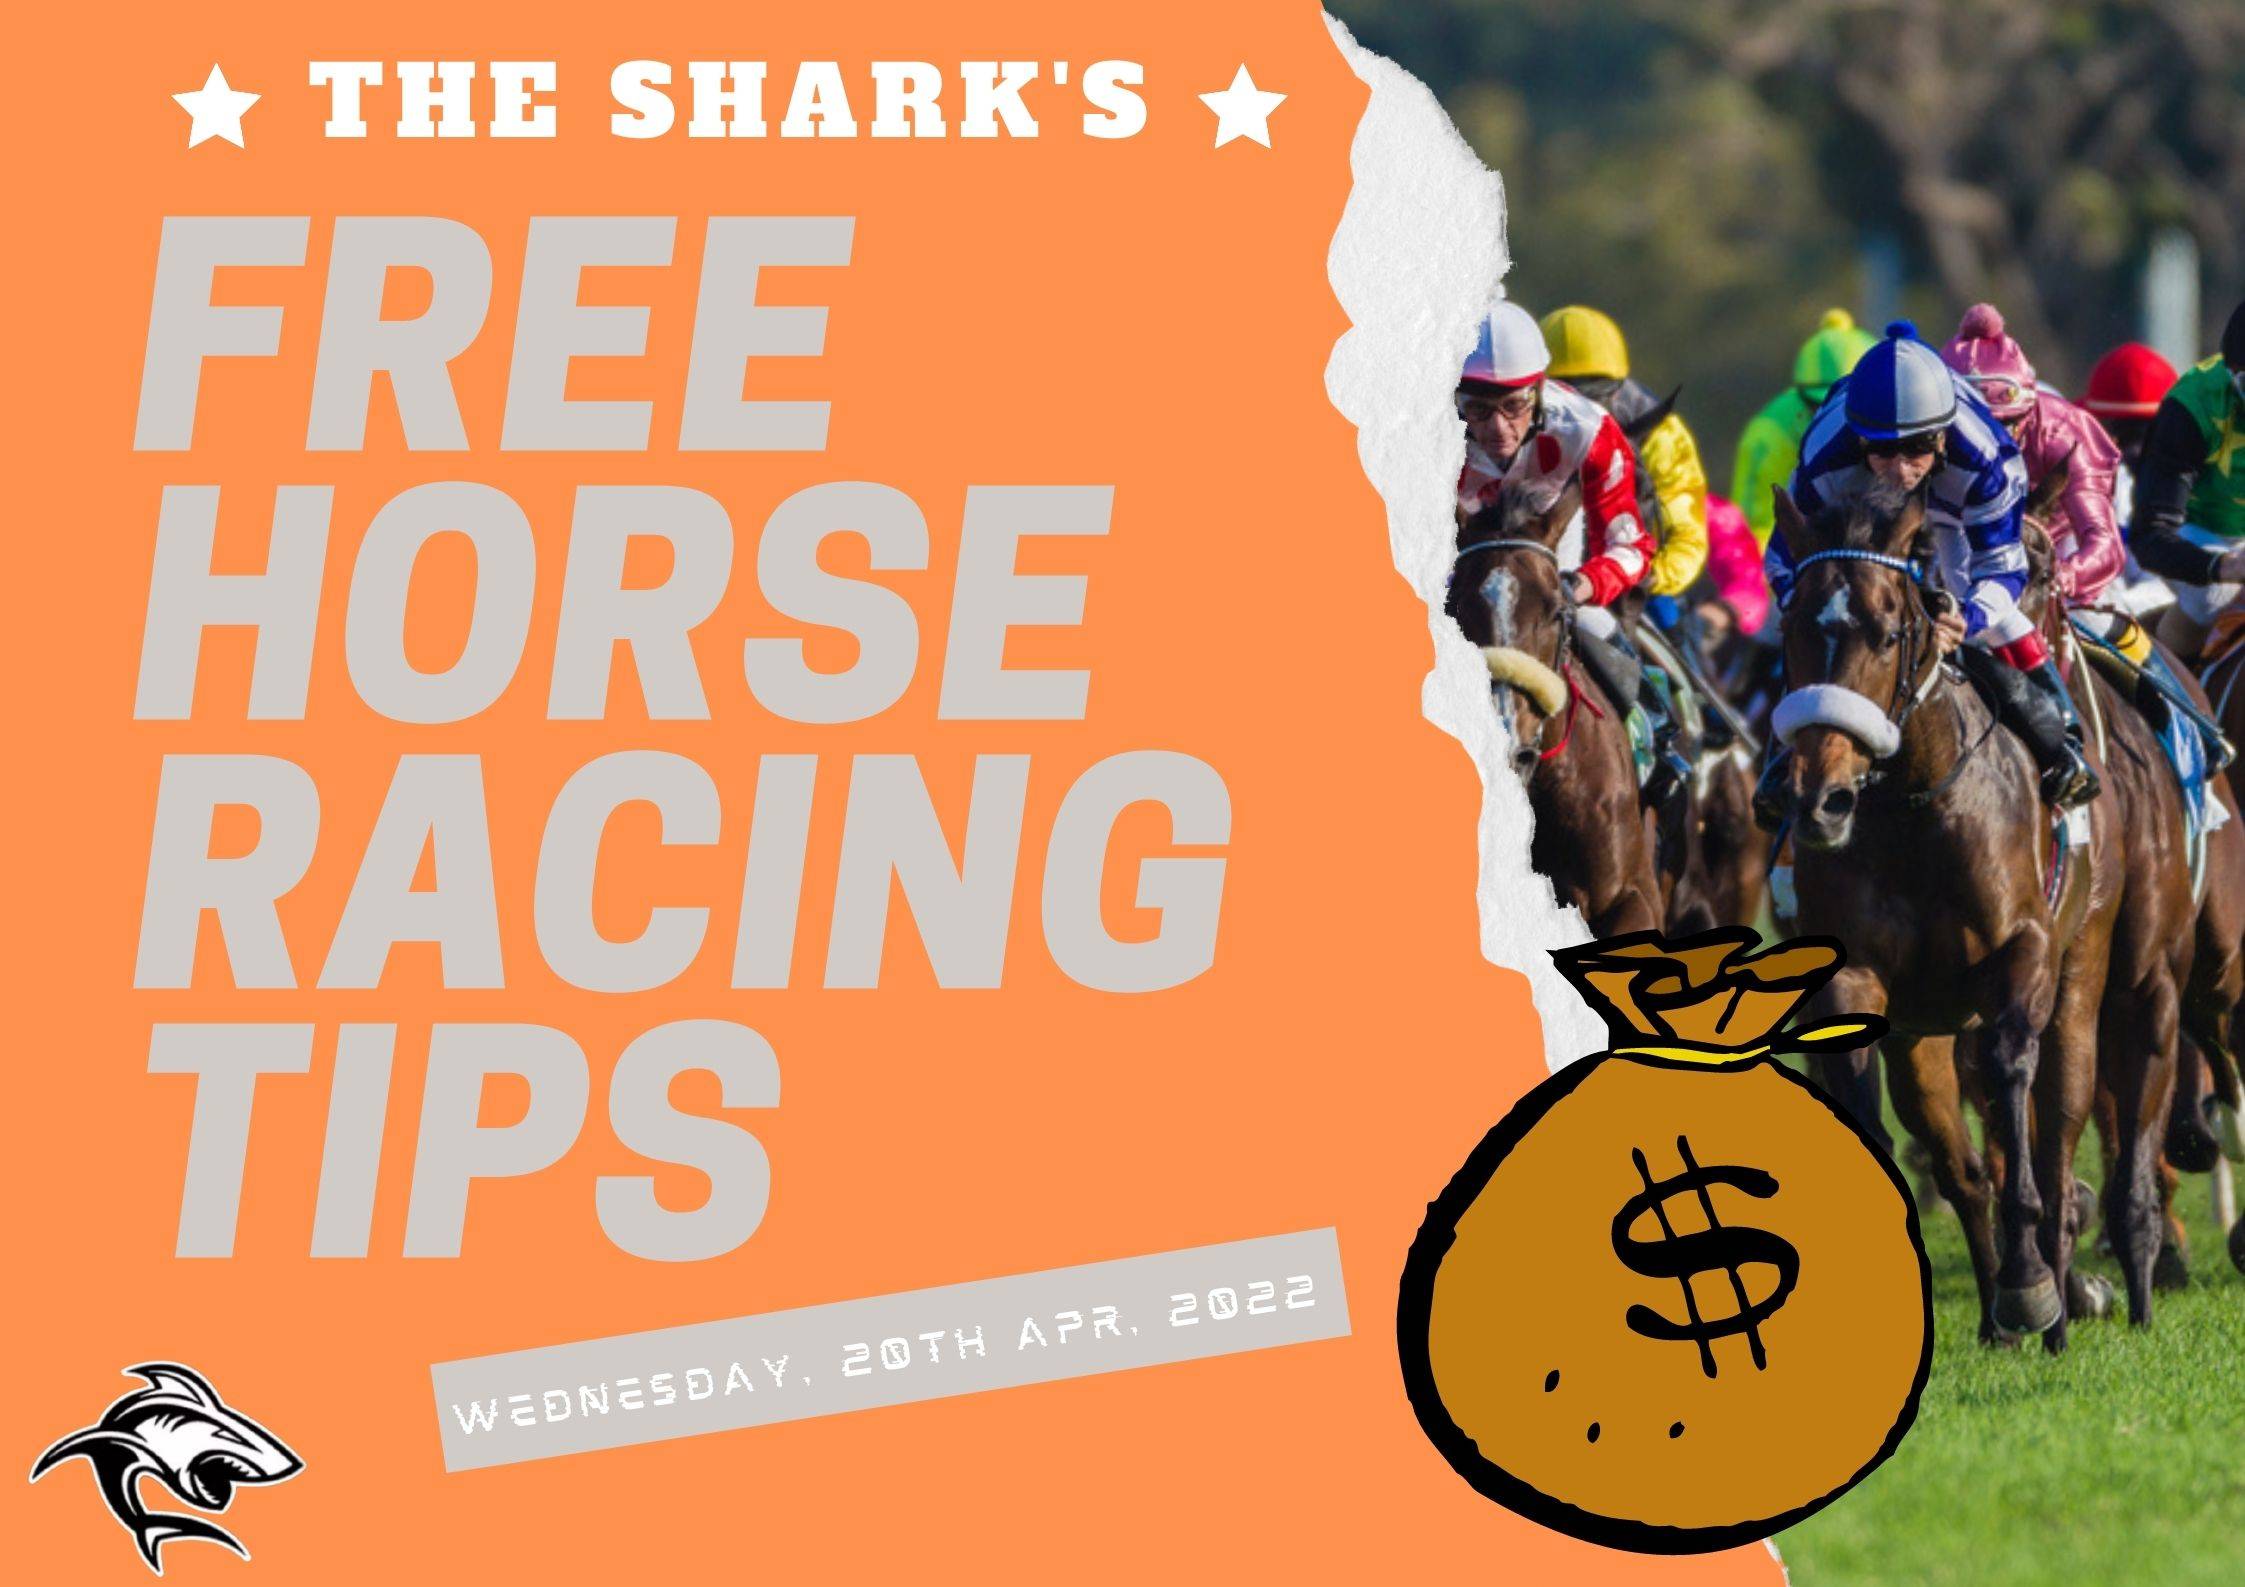 Free Horse Racing Tips - 20th Apr